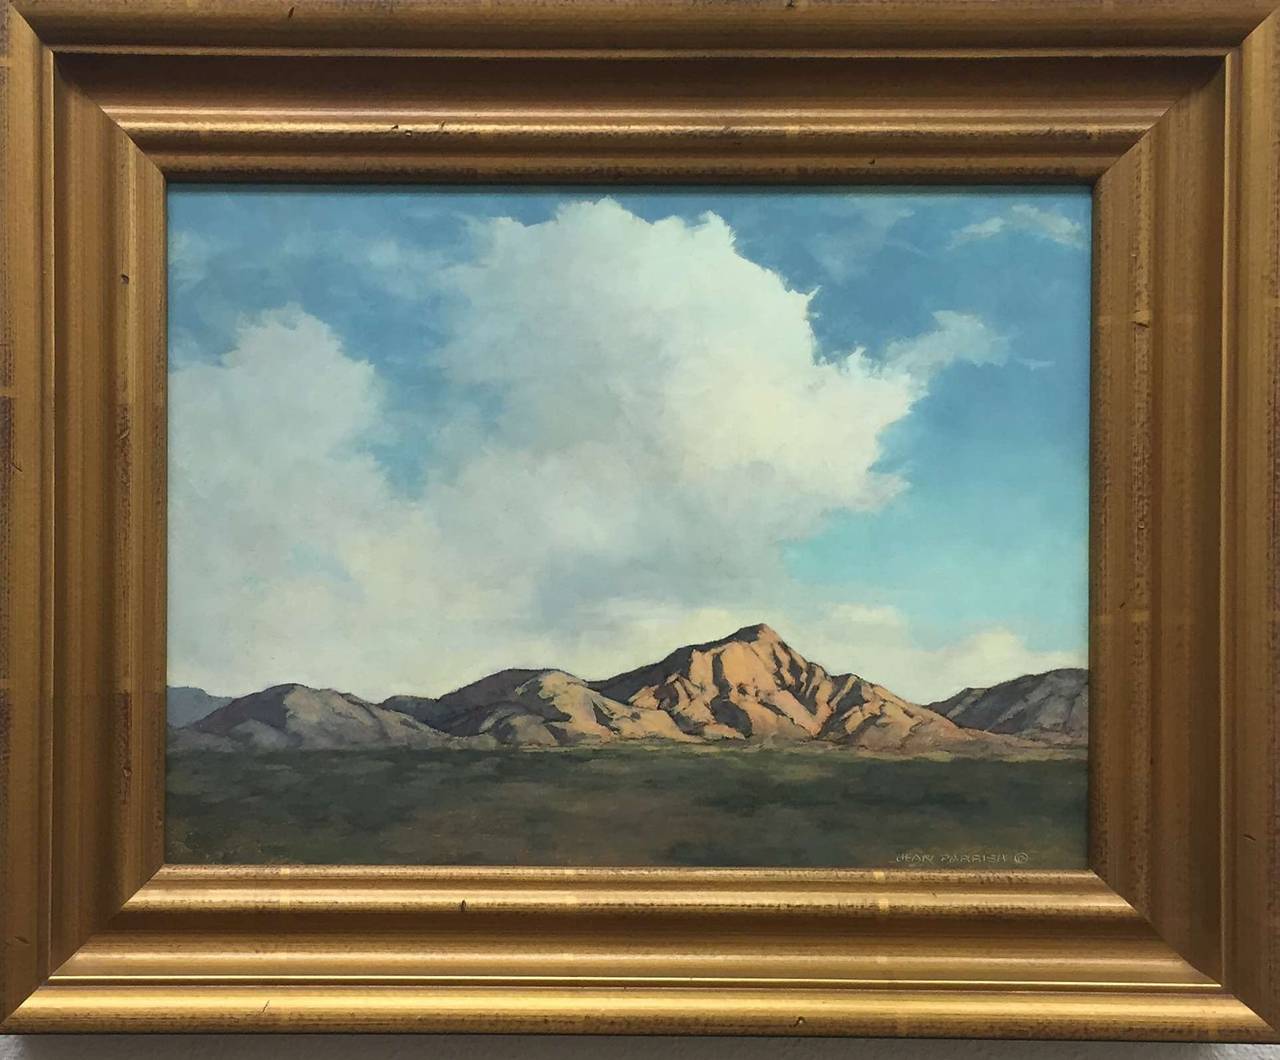 Cook's Range - Painting by Jean Parrish